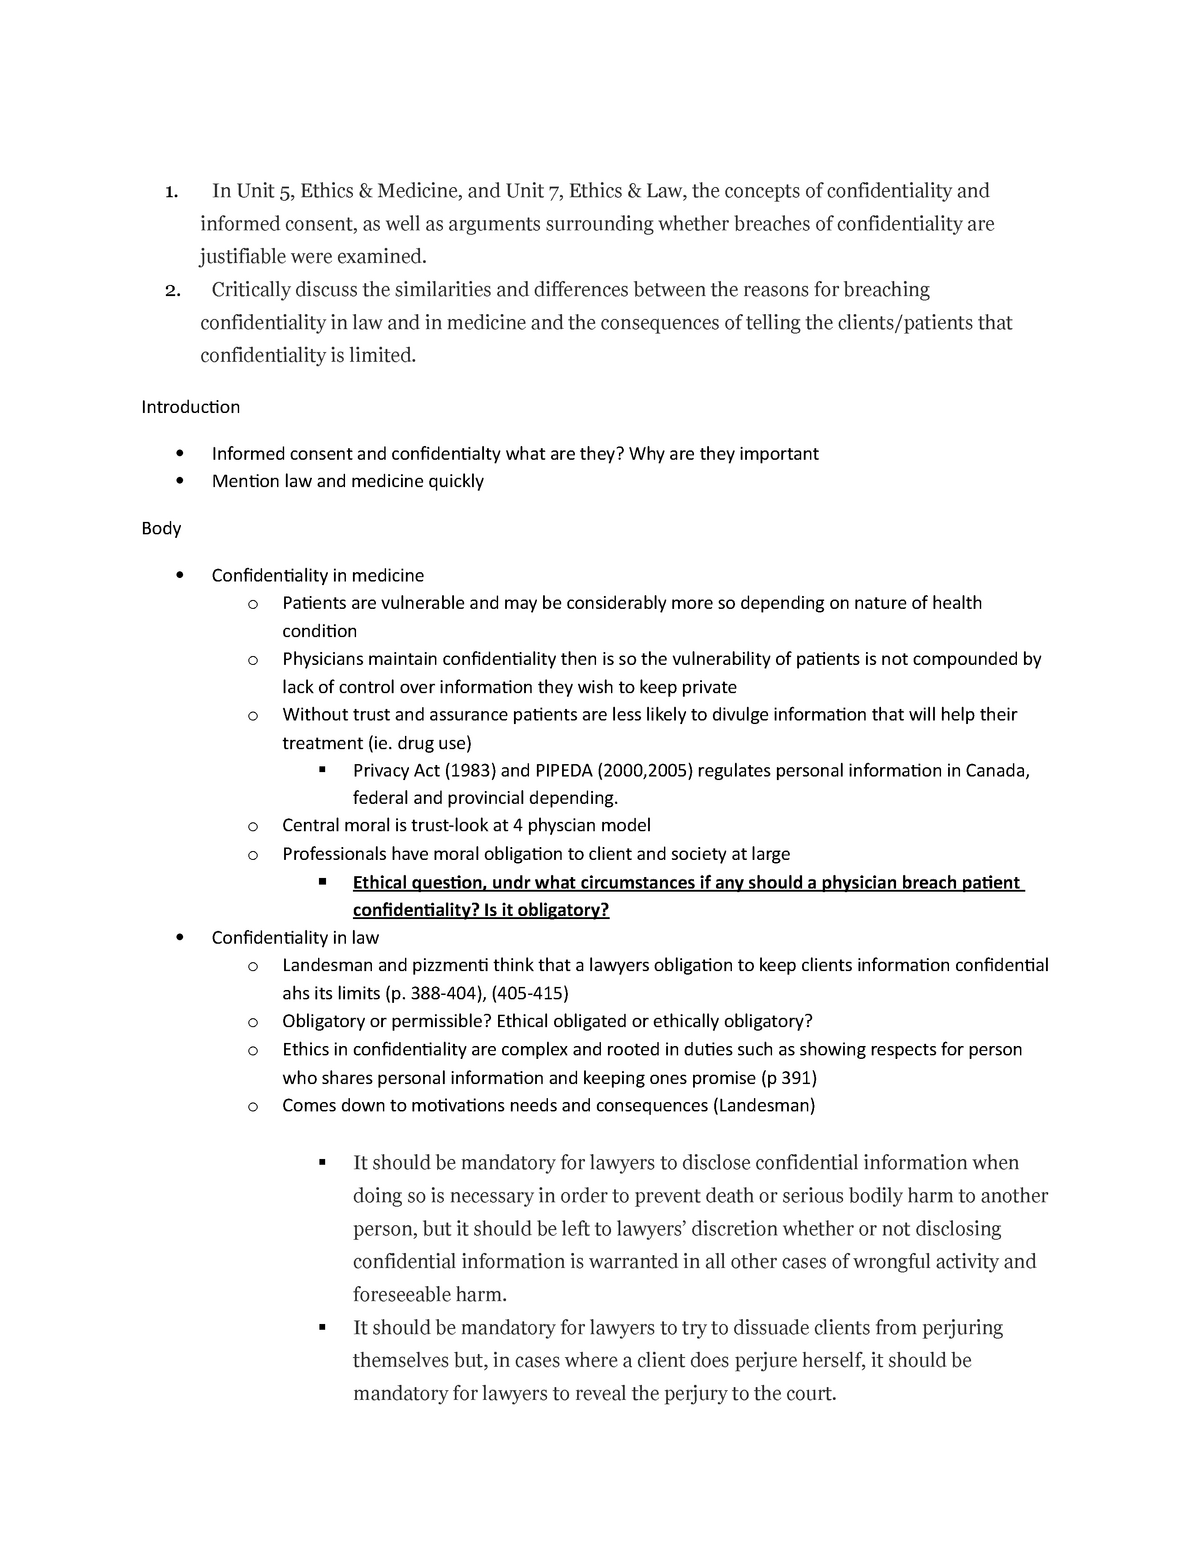 PHIL333 Notes Assignment 2 - In Unit 5, Ethics & Medicine, and Unit 7 ...